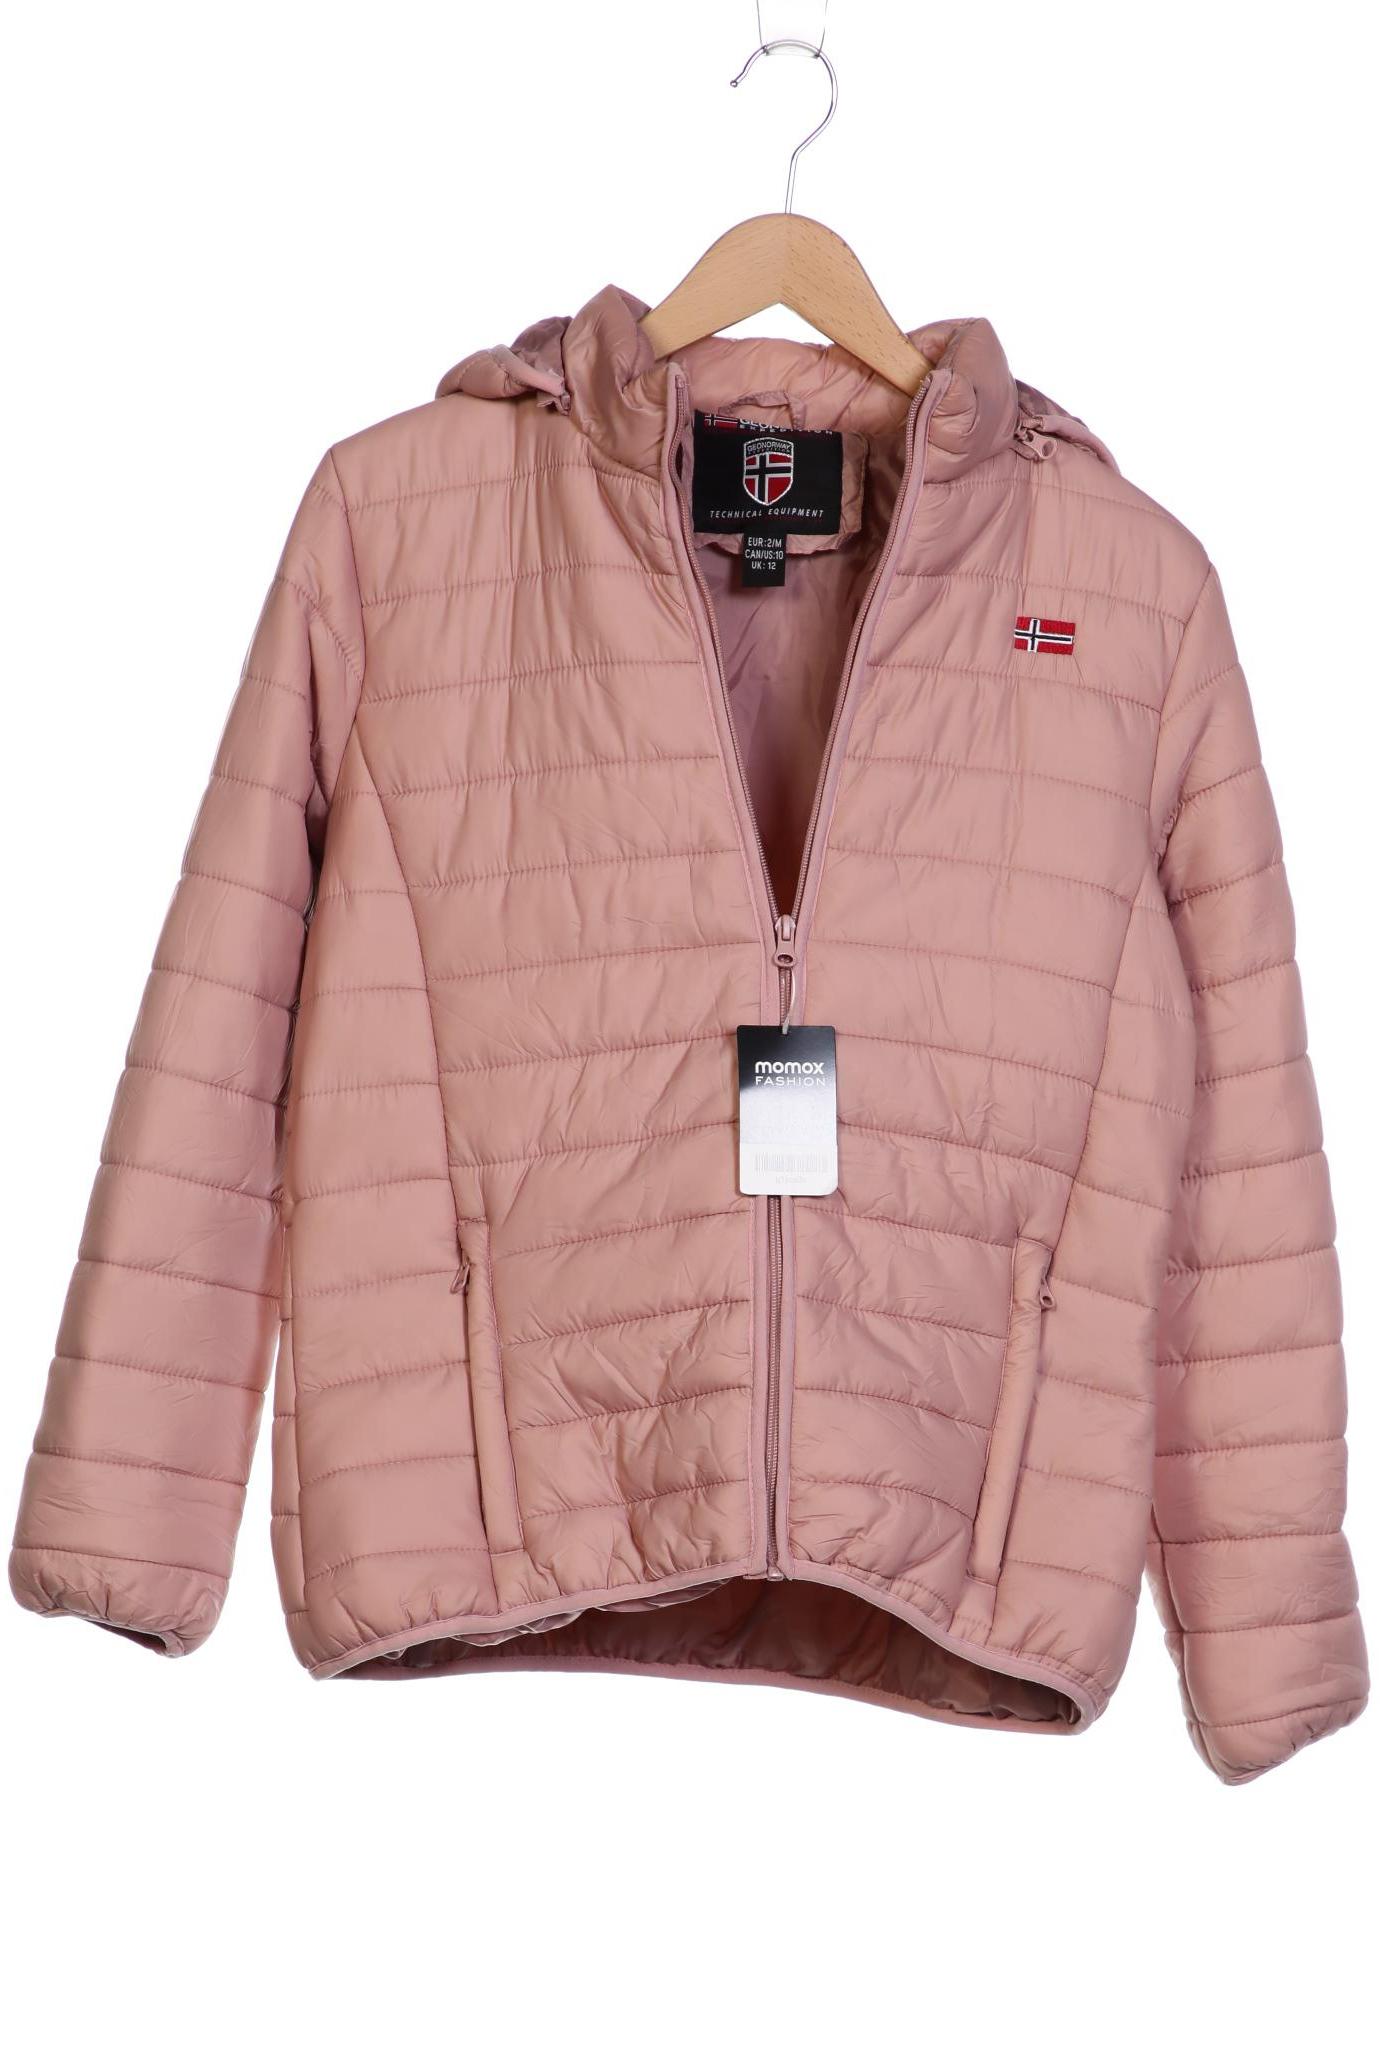 GEOGRAPHICAL NORWAY Damen Jacke, pink von geographical norway